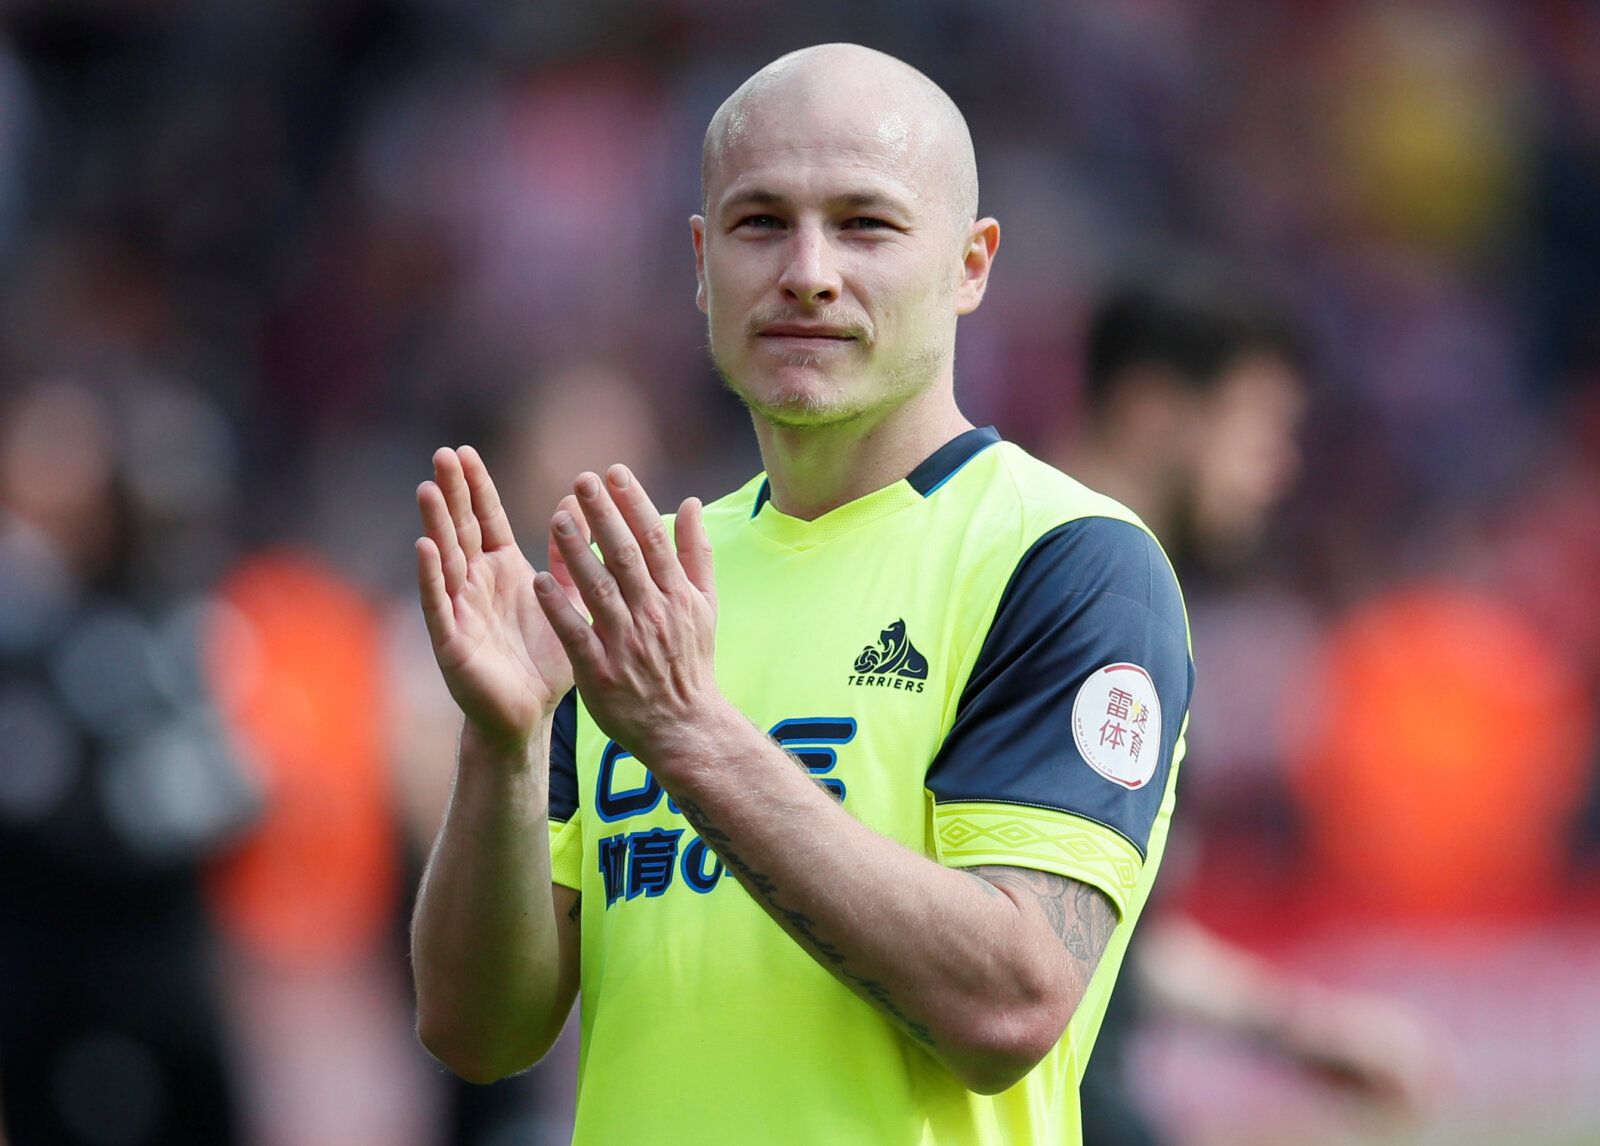 Soccer Football - Premier League - Southampton v Huddersfield Town - St Mary's Stadium, Southampton, Britain - May 12, 2019  Huddersfield Town's Aaron Mooy applauds fans after the match   REUTERS/David Klein  EDITORIAL USE ONLY. No use with unauthorized audio, video, data, fixture lists, club/league logos or 